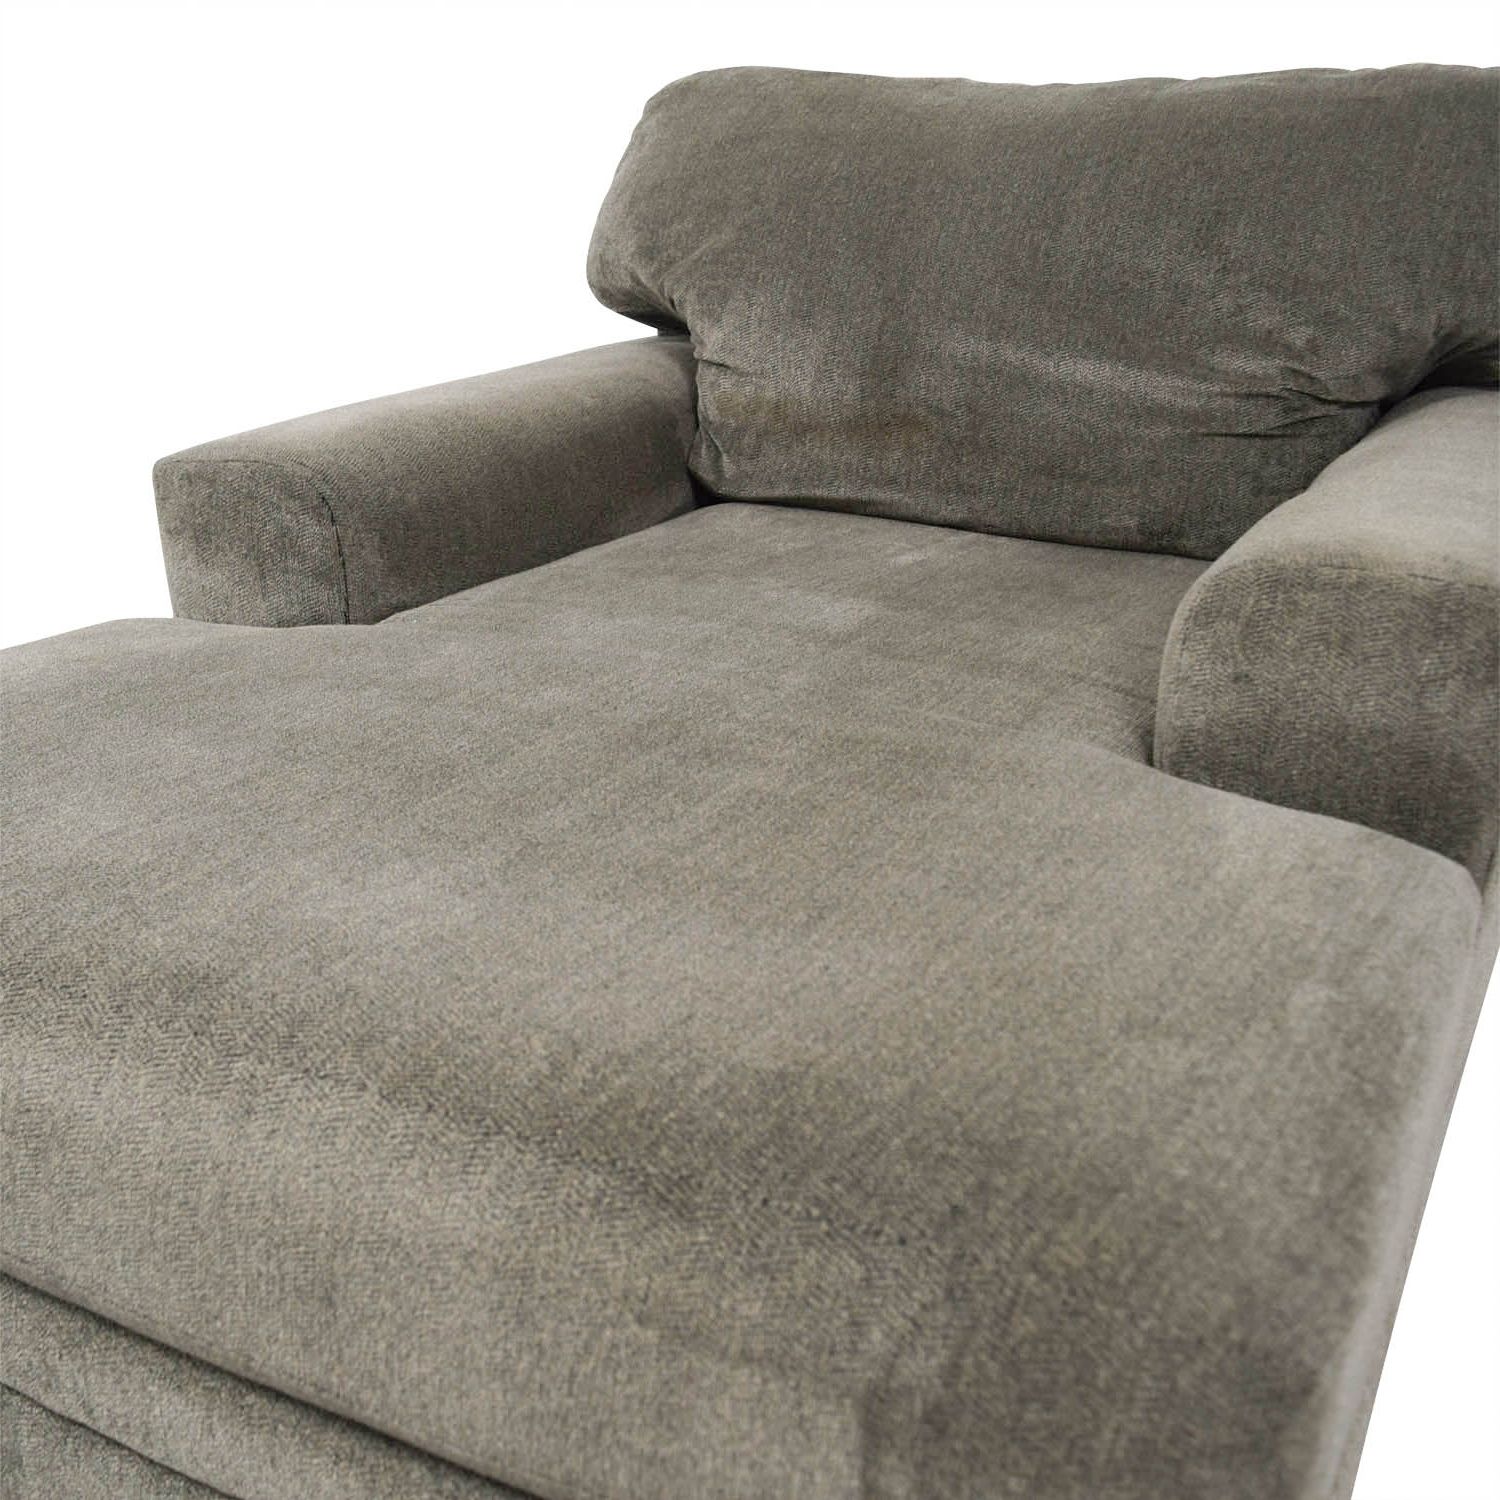 [%81% Off – Bob's Furniture Bob's Furniture Grey Chaise Lounge / Sofas Intended For Widely Used Grey Chaises|grey Chaises For Latest 81% Off – Bob's Furniture Bob's Furniture Grey Chaise Lounge / Sofas|well Known Grey Chaises For 81% Off – Bob's Furniture Bob's Furniture Grey Chaise Lounge / Sofas|famous 81% Off – Bob's Furniture Bob's Furniture Grey Chaise Lounge / Sofas Regarding Grey Chaises%] (View 13 of 15)